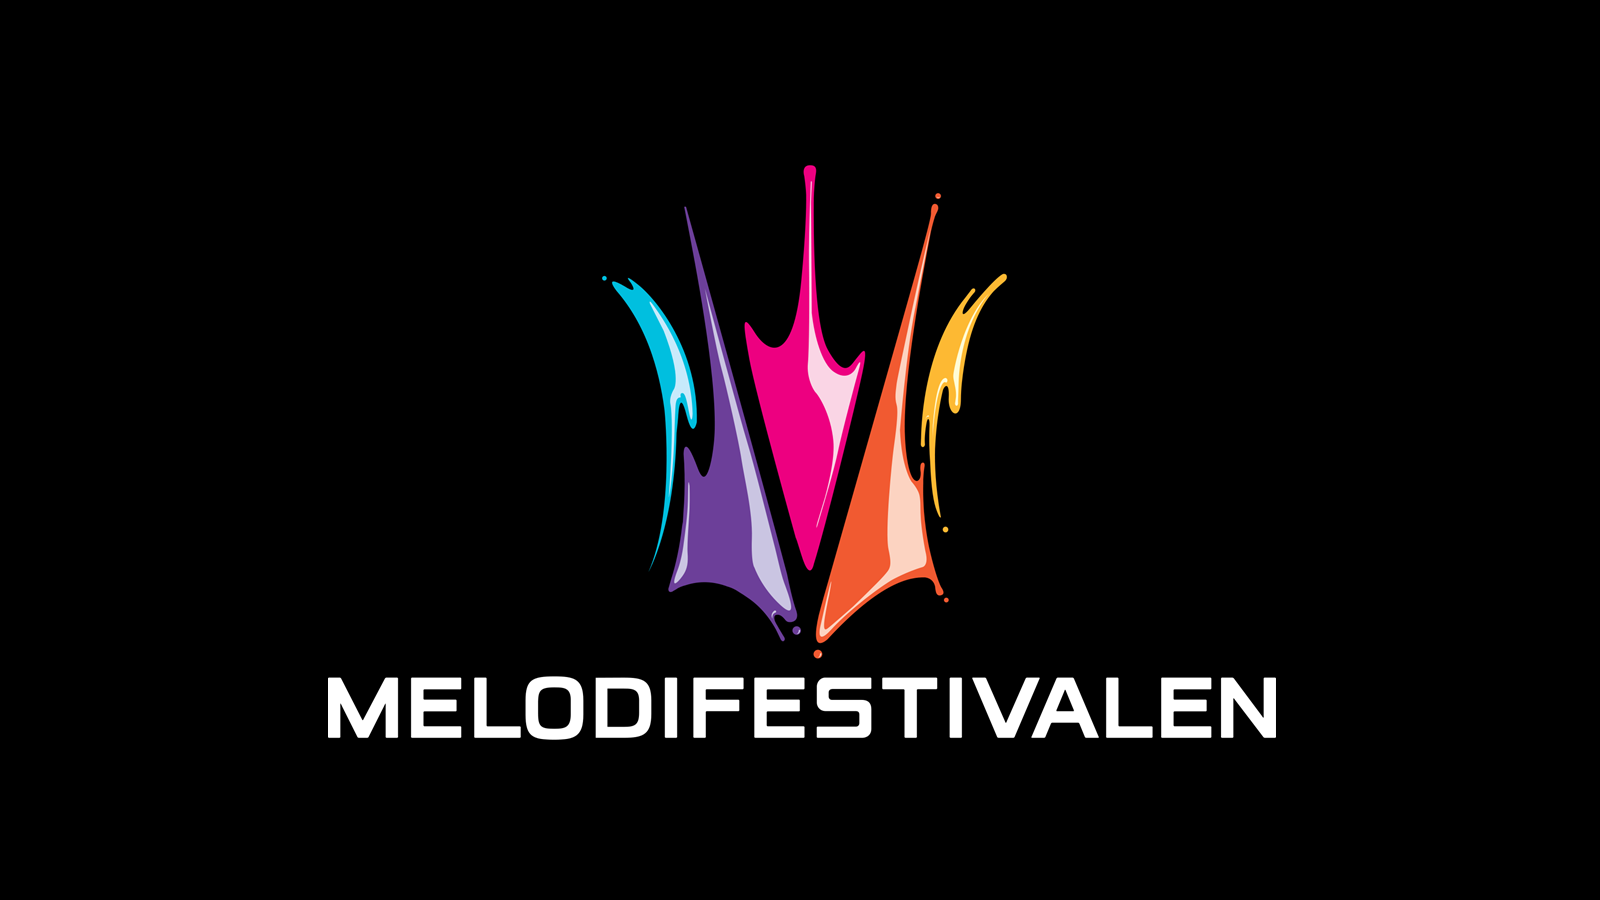 Sweden: Who should get another #melfest chance?